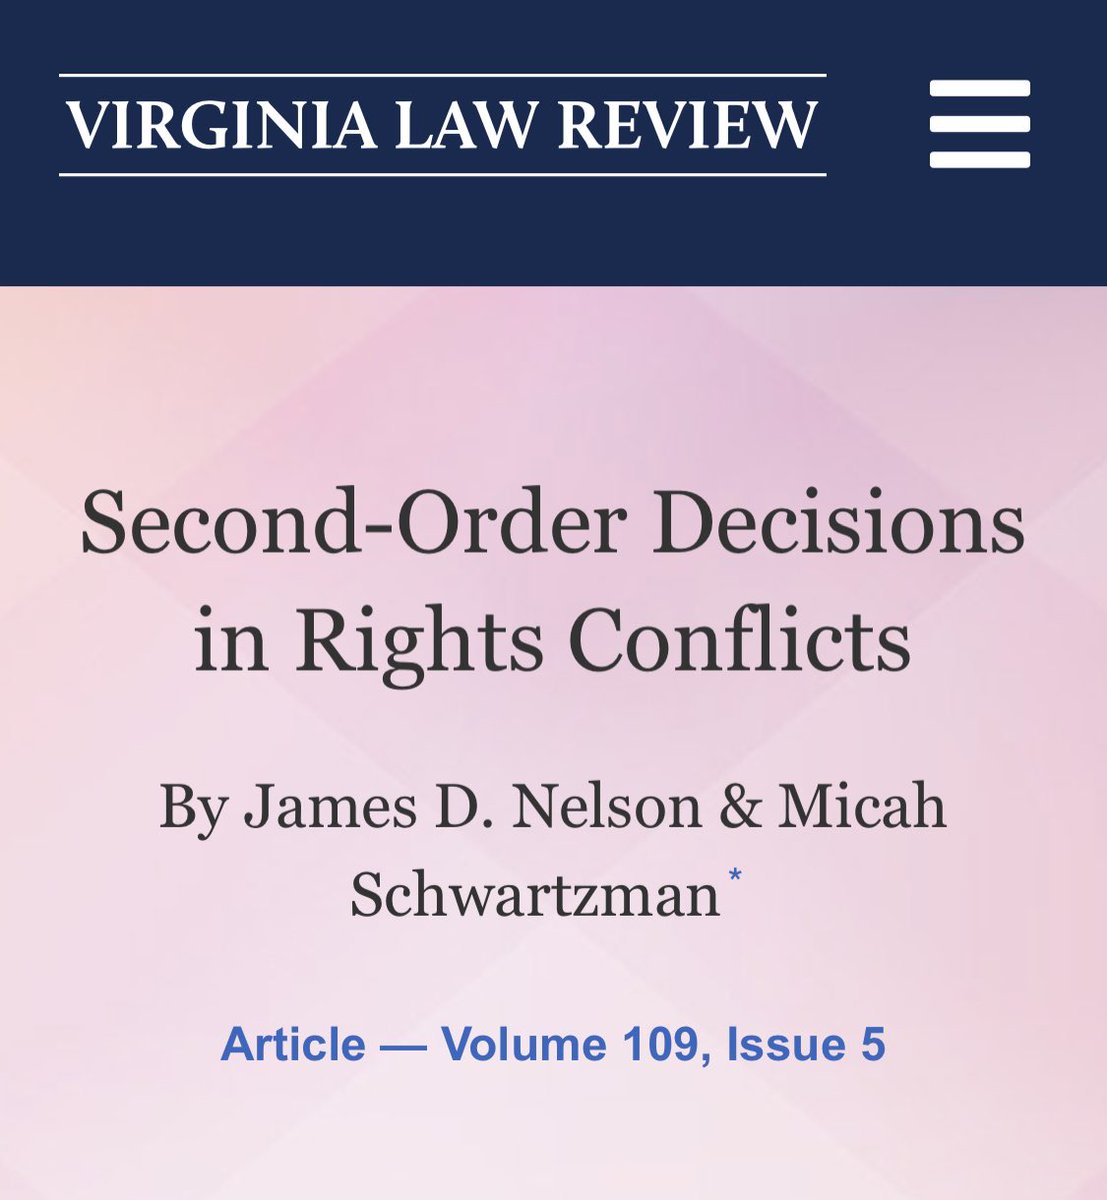 New paper with @ProfJDNelson, replying to arguments for least cost and harm avoidance approaches in constitutional rights conflicts. We survey a broader range of decision rules for hard cases. With thanks to @VirginiaLawRev. virginialawreview.org/articles/secon…